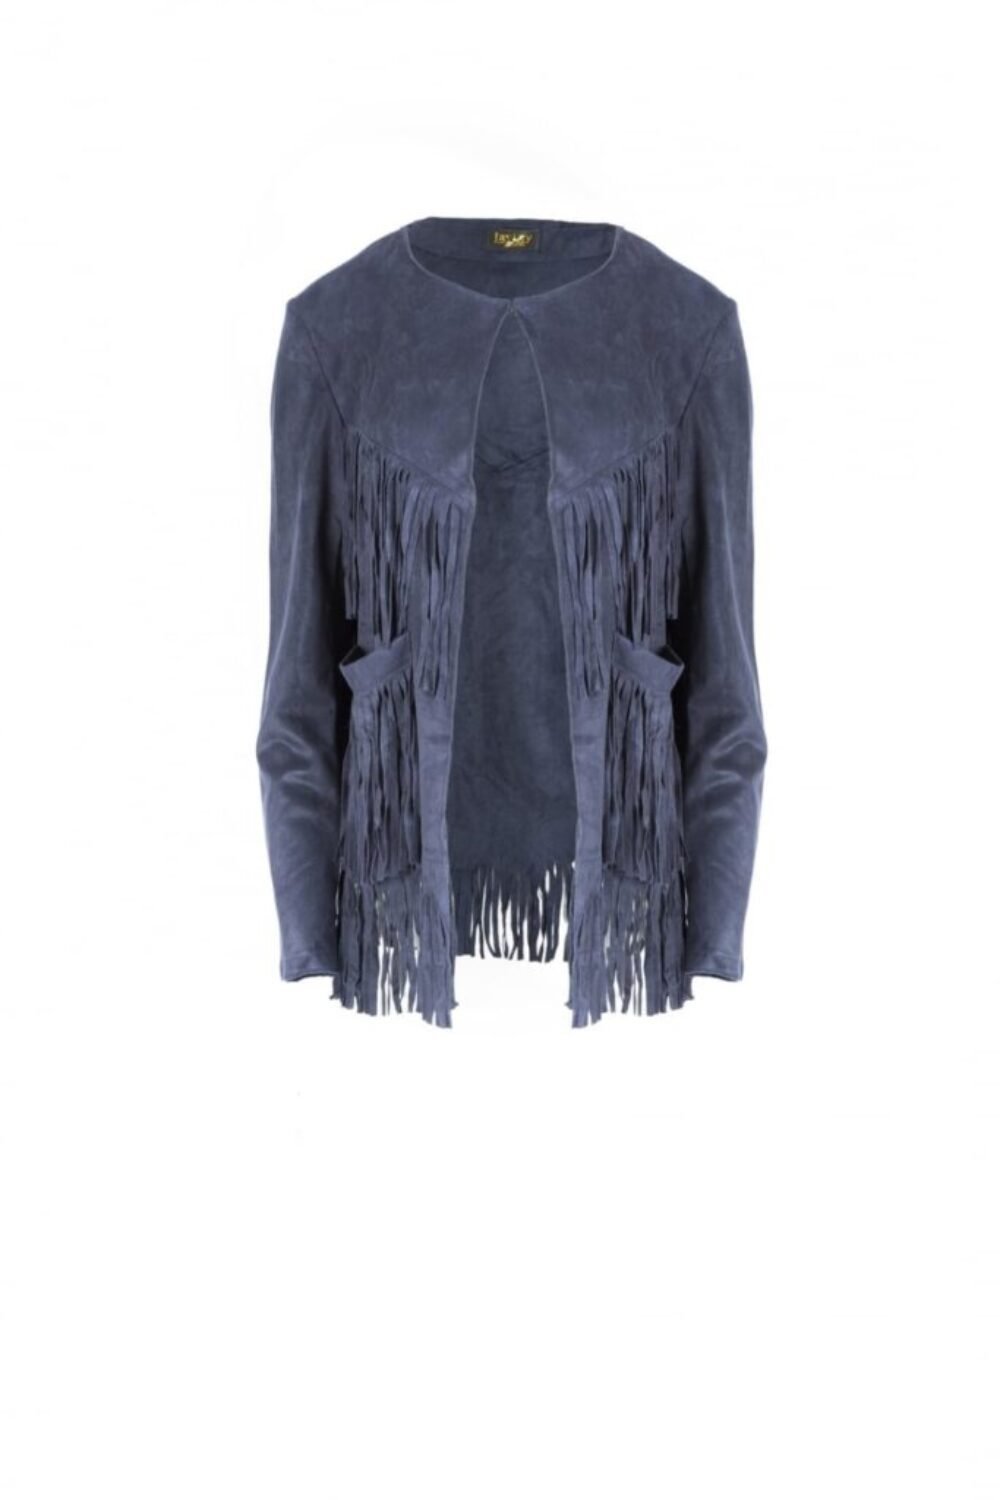 Shop Lux Blue Faux Suede Jacket and women's luxury and designer clothes at www.lux-apparel.co.uk